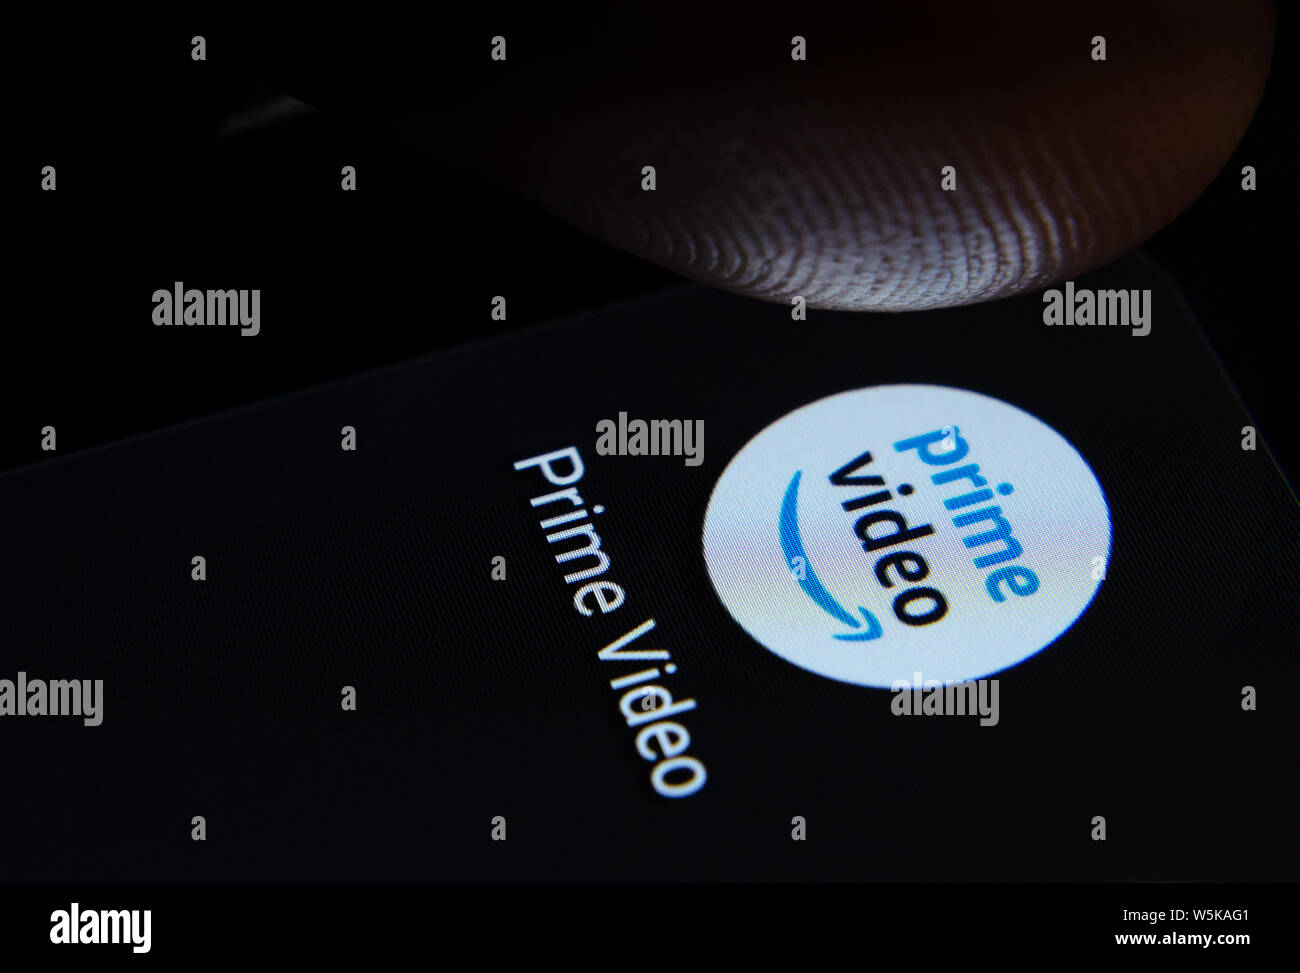 Amazon Prime Video App Icon On The Smartphone Screen With Visible Pixels And The Finger About To Launch It Stock Photo Alamy